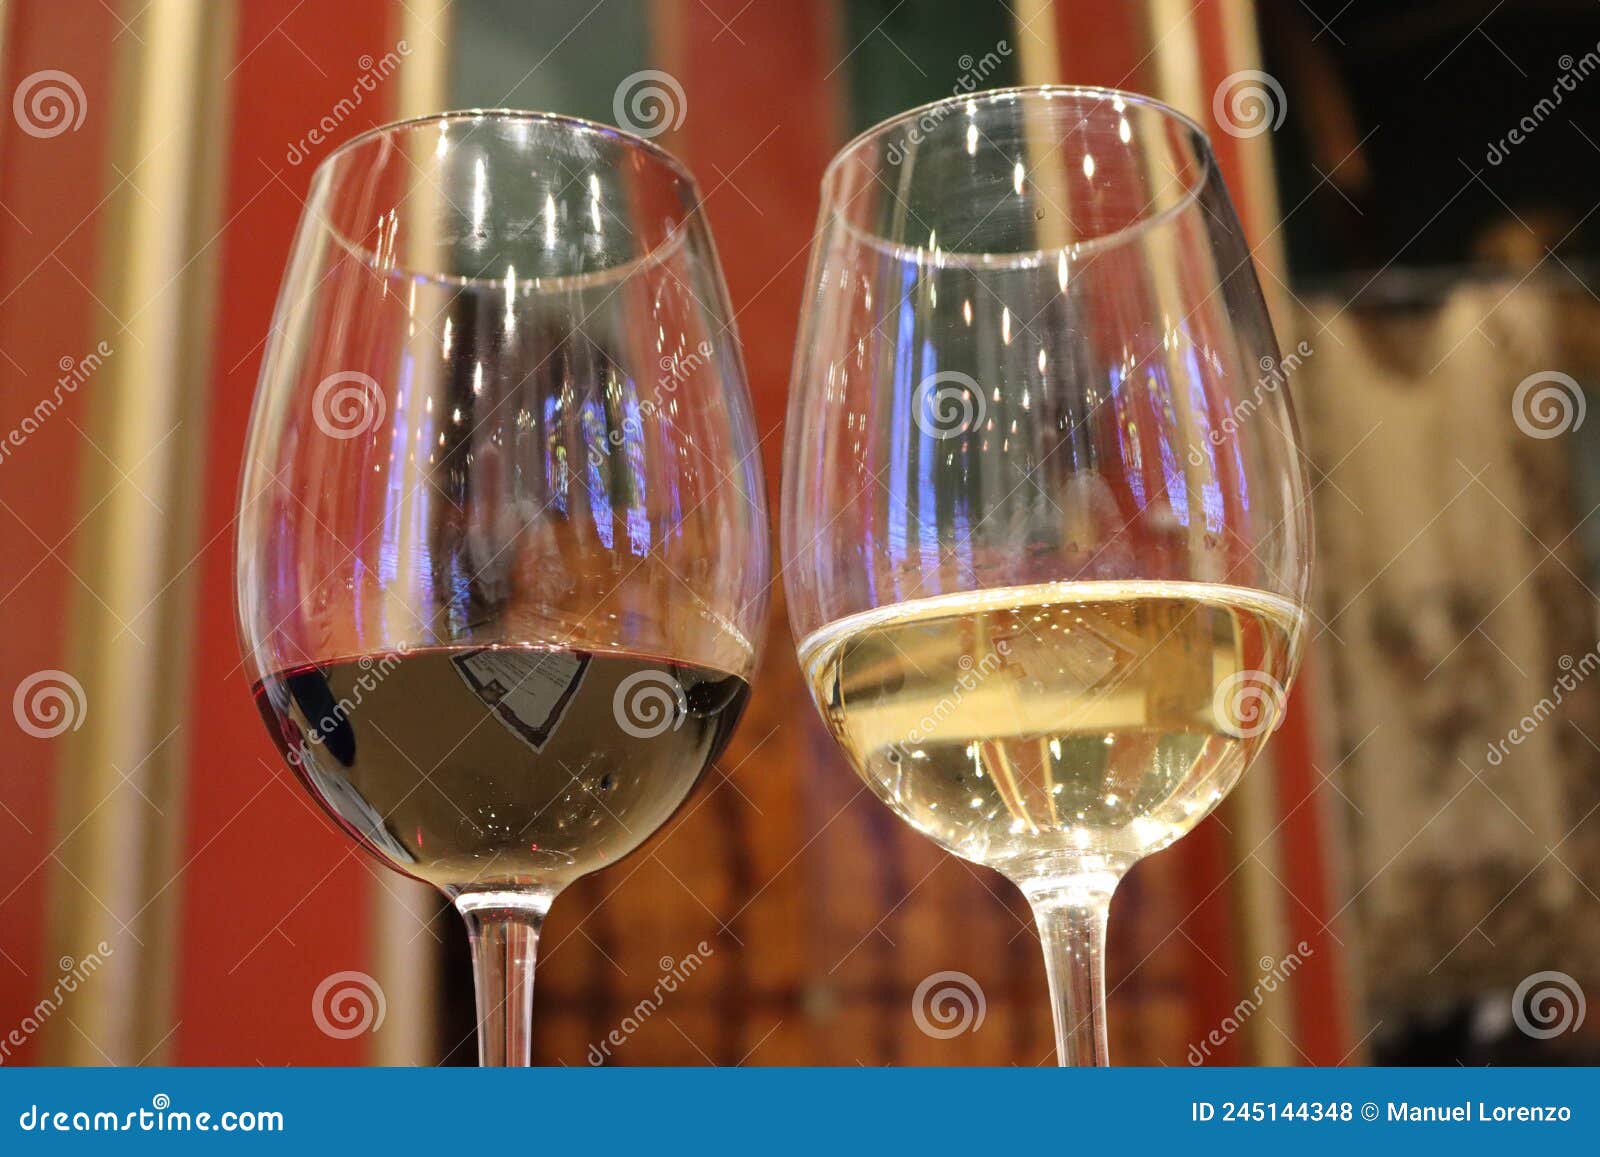 delicious white and red wines in fragrant glasses tasty reflections